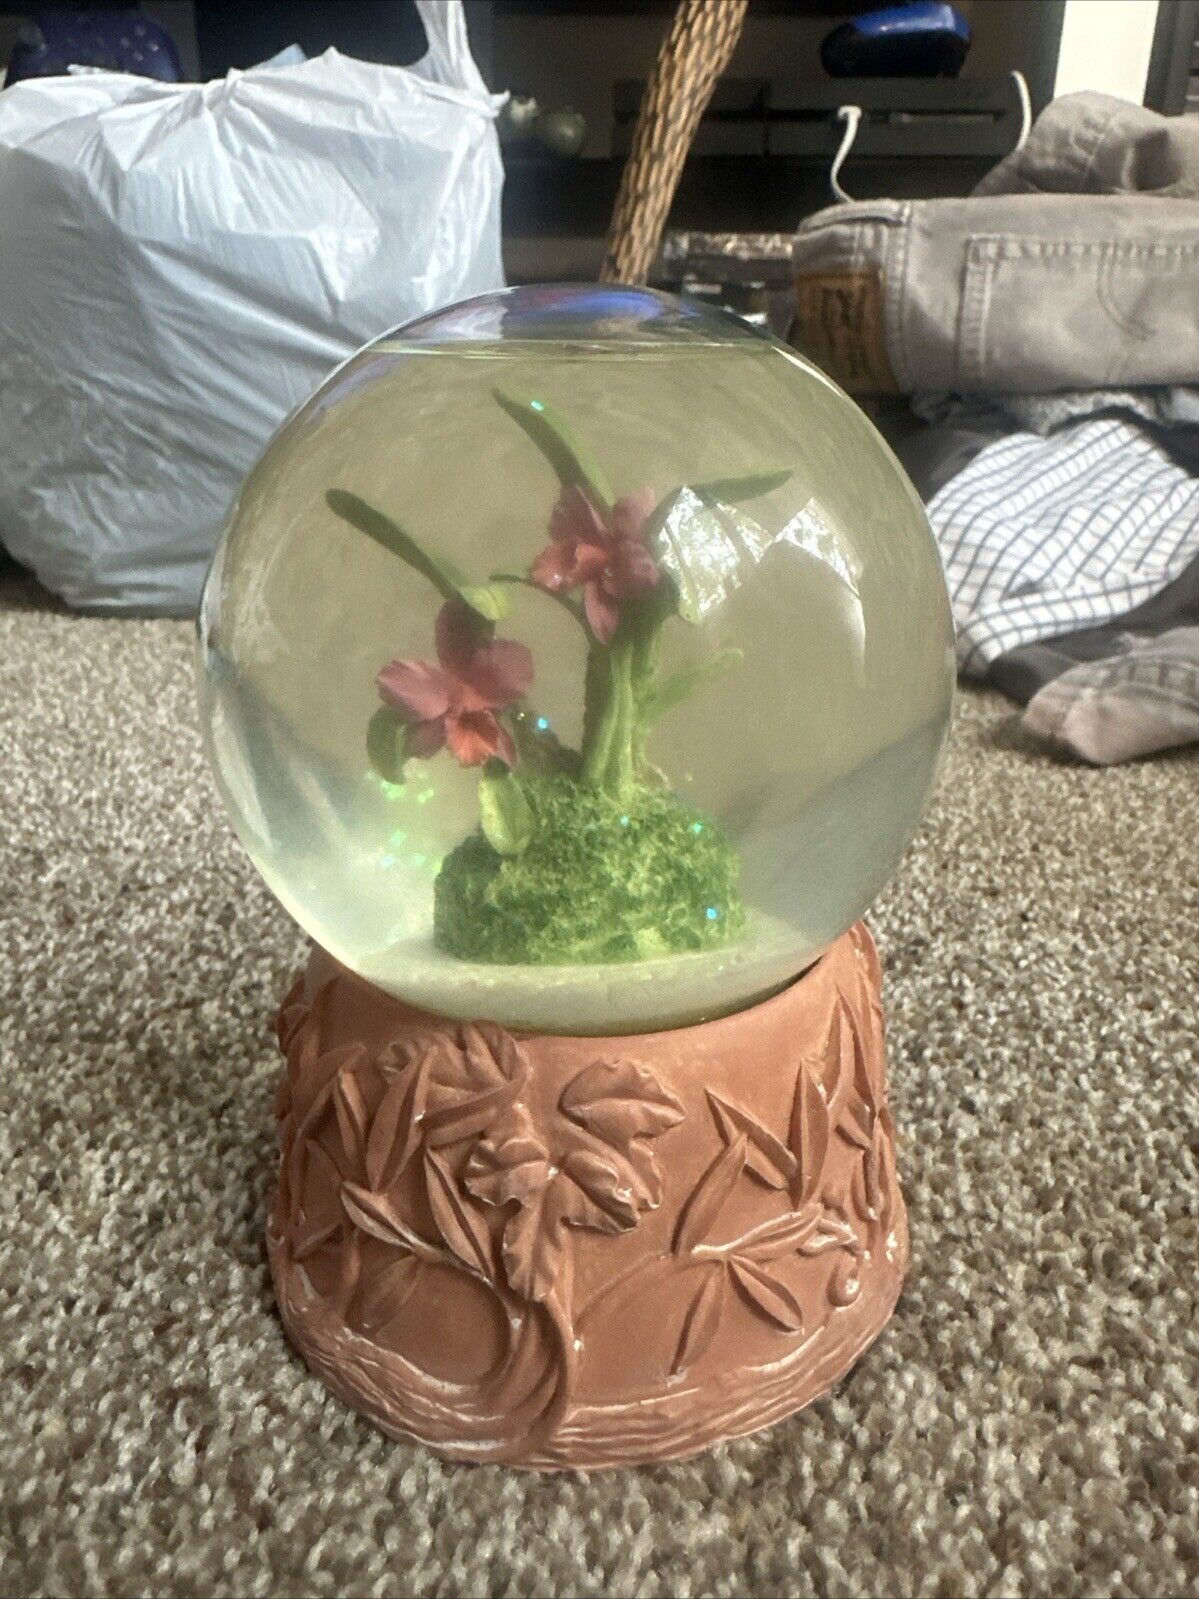 VINTAGE SILVESTRI MUSICAL SNOWGLOBE Pink Daffodils WIND-UP SNOWDOME Music Works